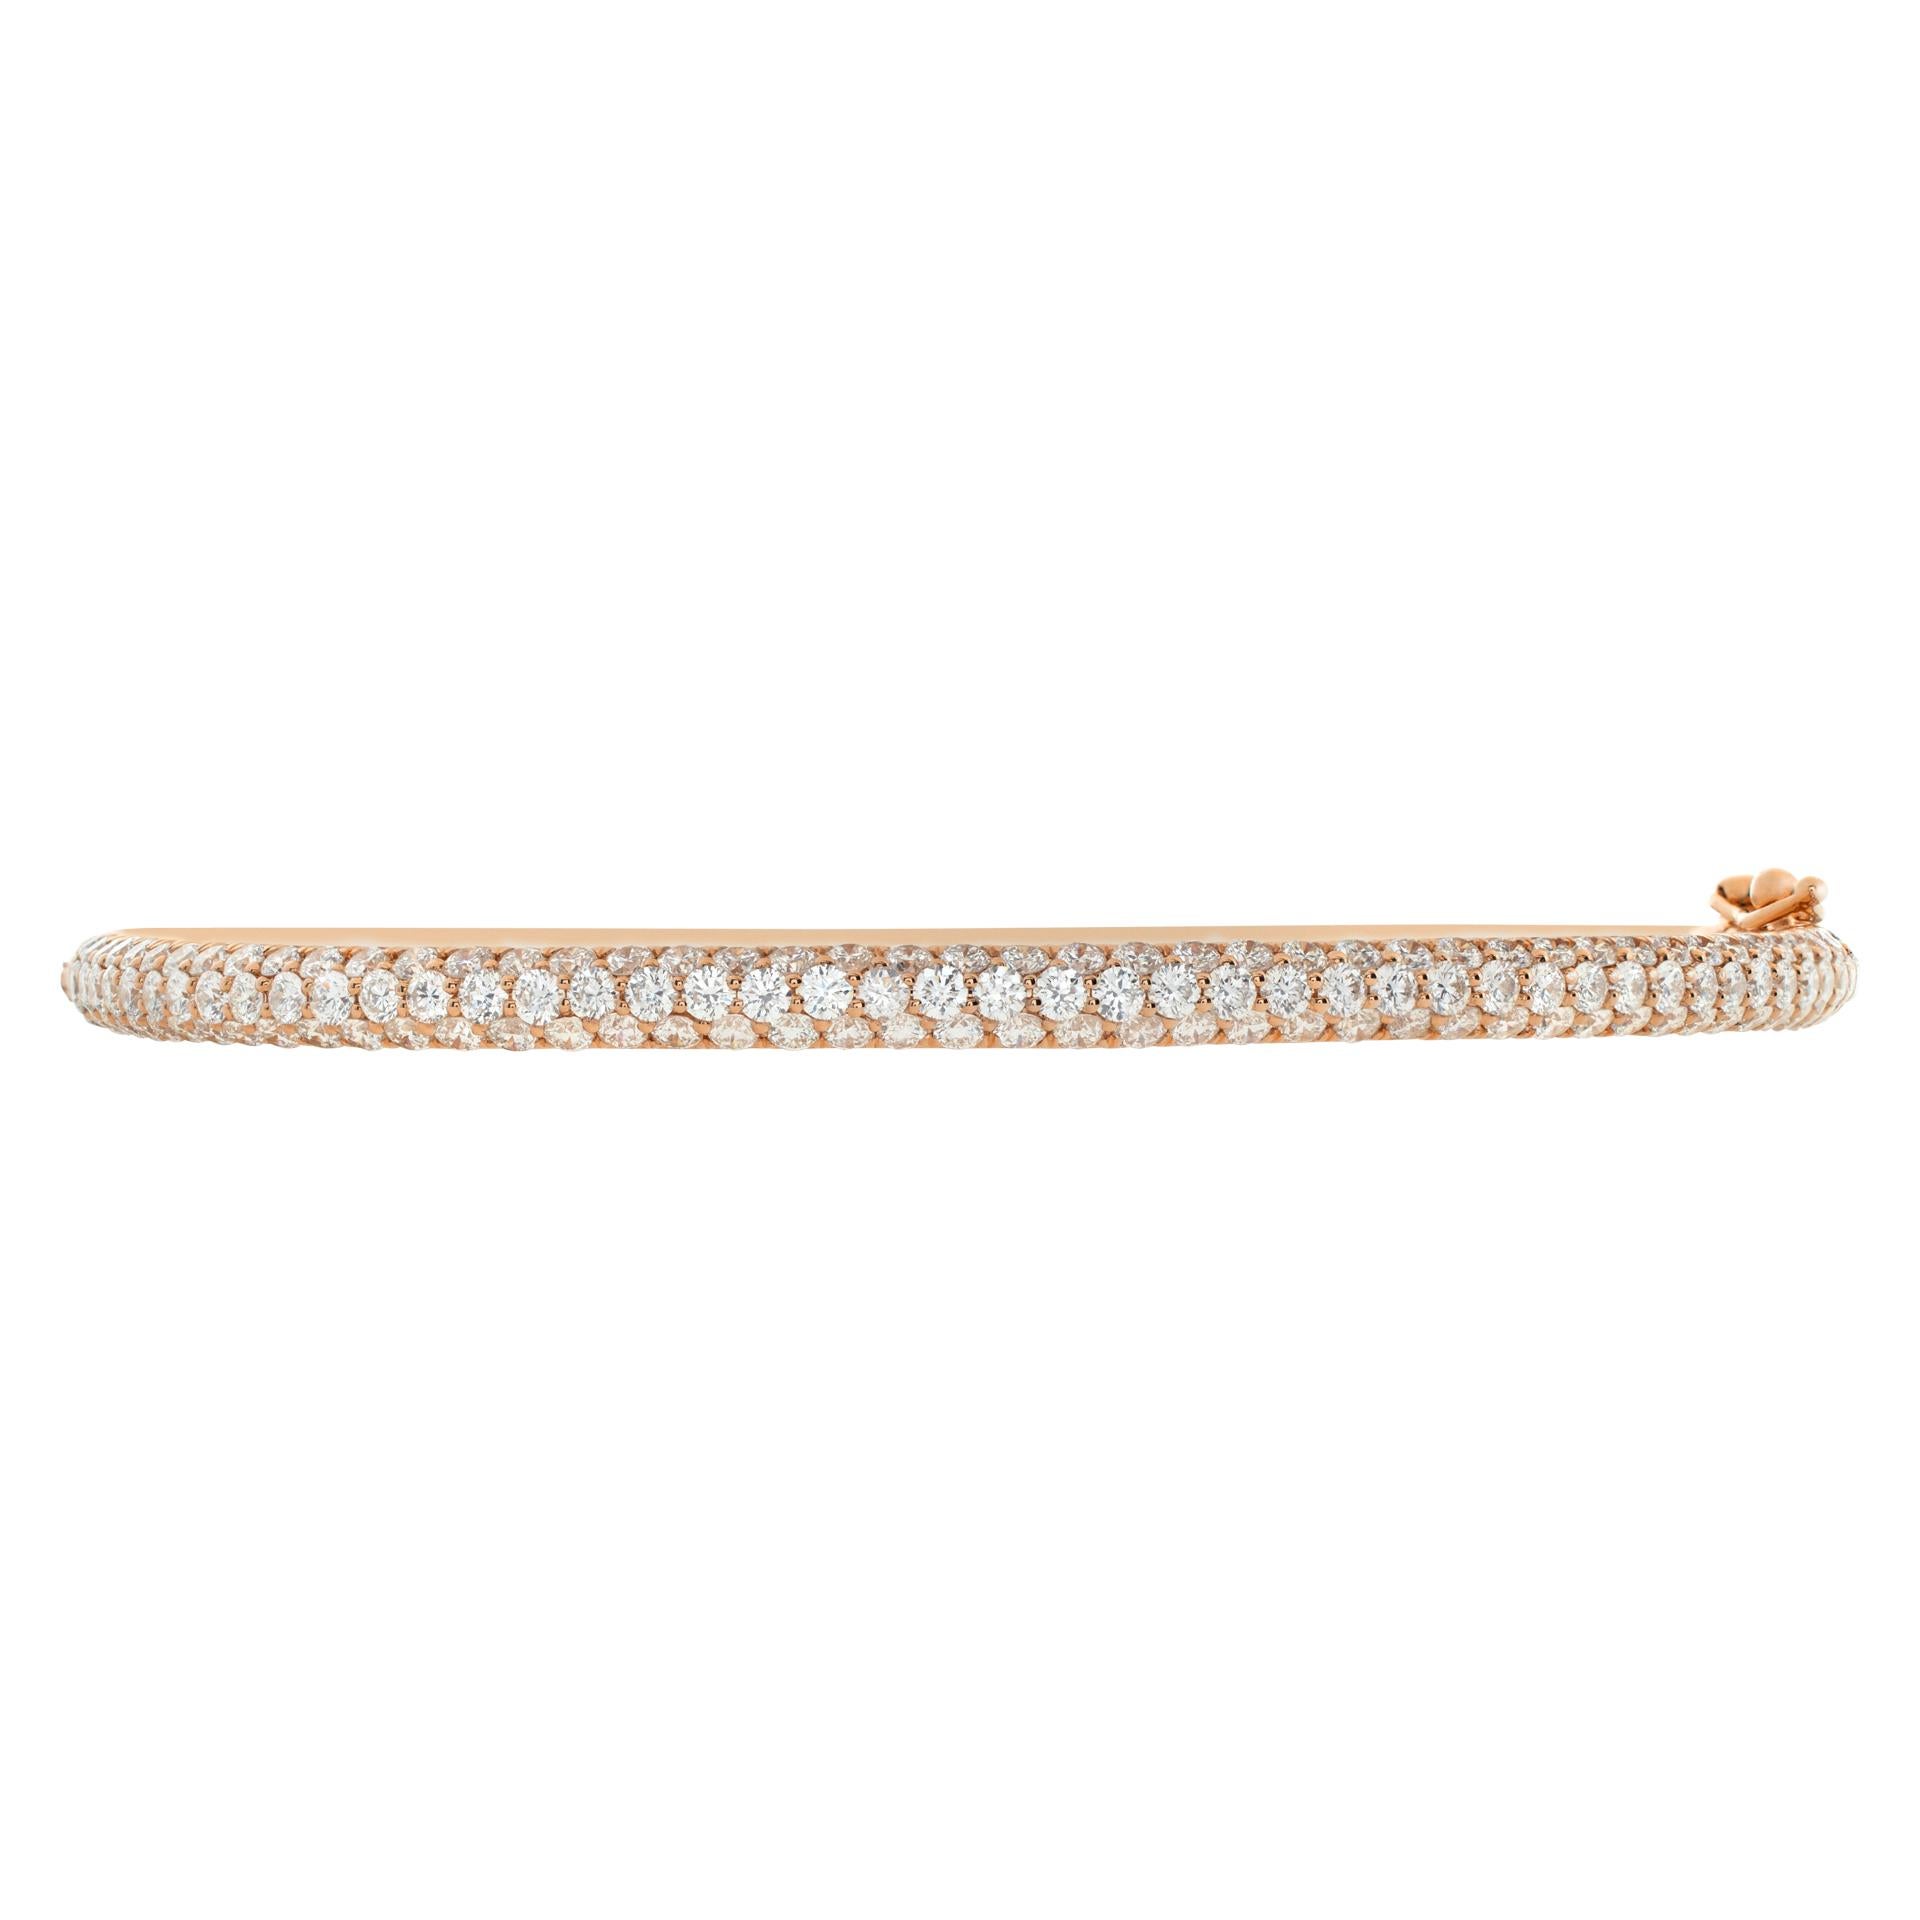 Timeless semi-eternity pave diamond bangle with 2.86 carats in brilliant round cut pave diamonds set in 18k rose gold. Fits wrists up to 7.5'', width 3mm.